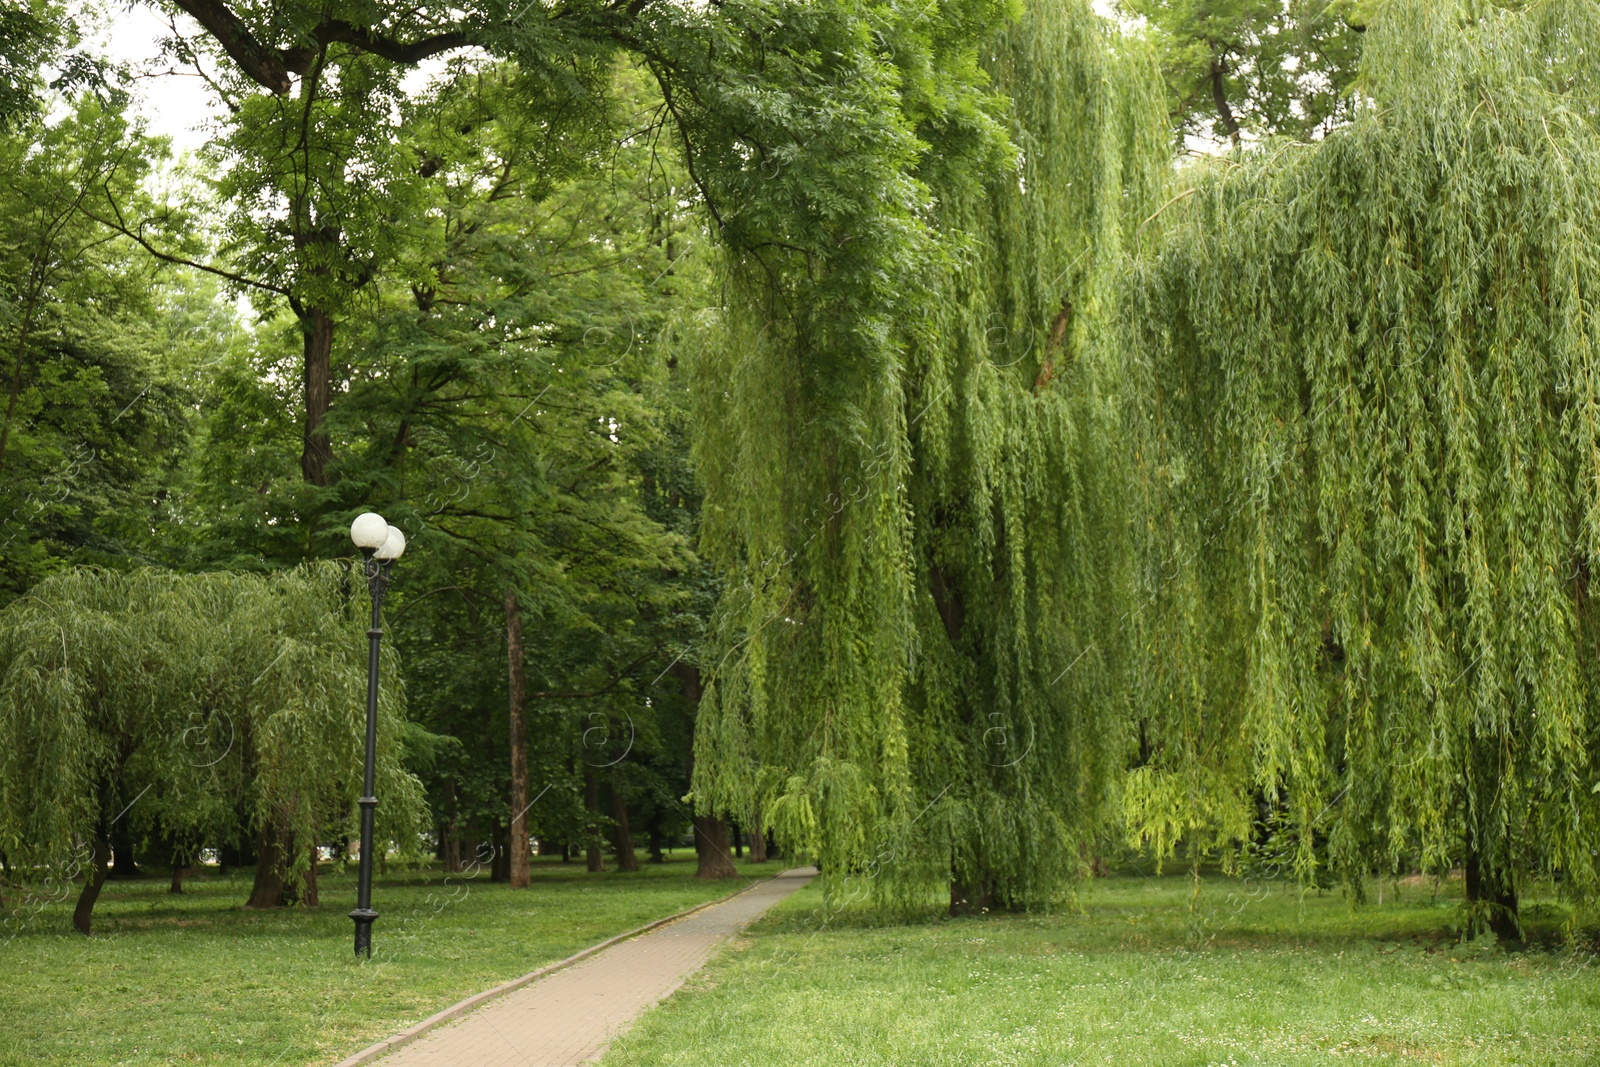 Photo of Picturesque view of park with trees, pathway and green grass